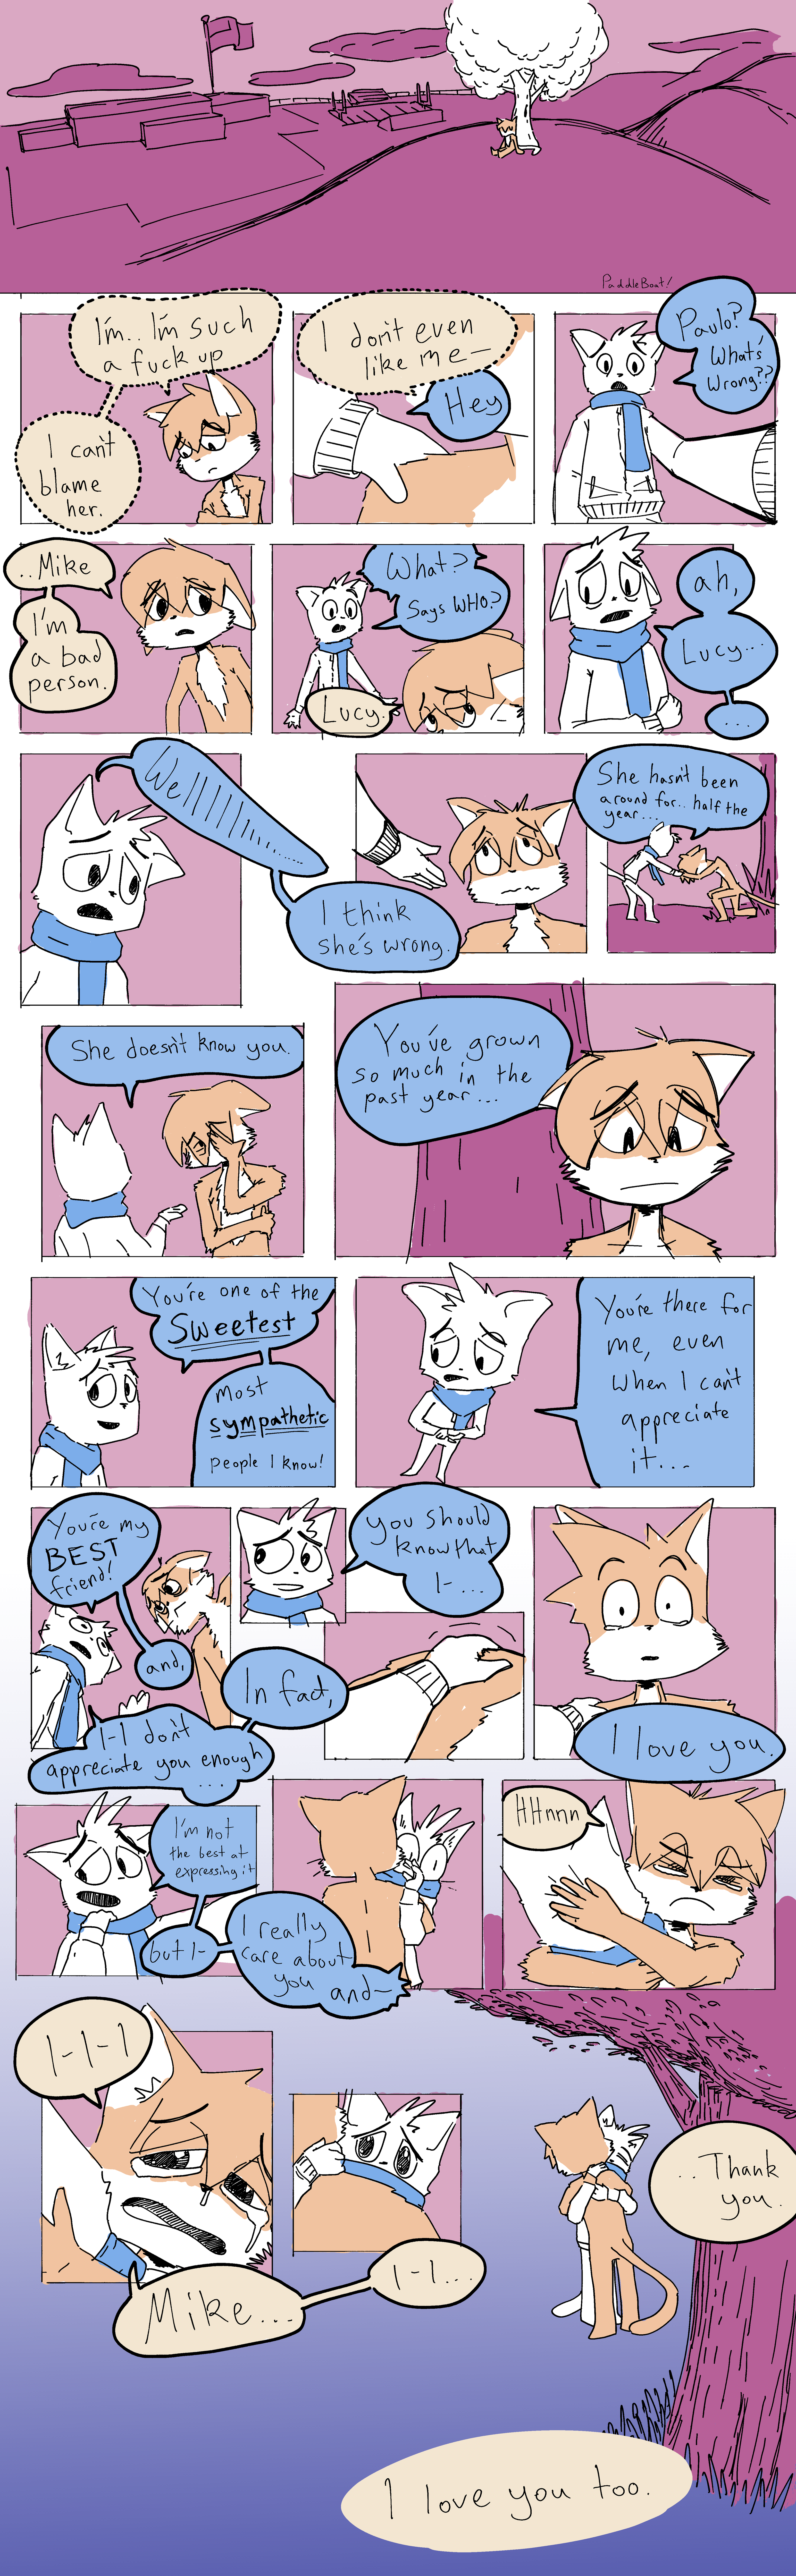 Candybooru image #15490, tagged with Mike MikexPaulo PaddleBoat_(Artist) Paulo Tree comic